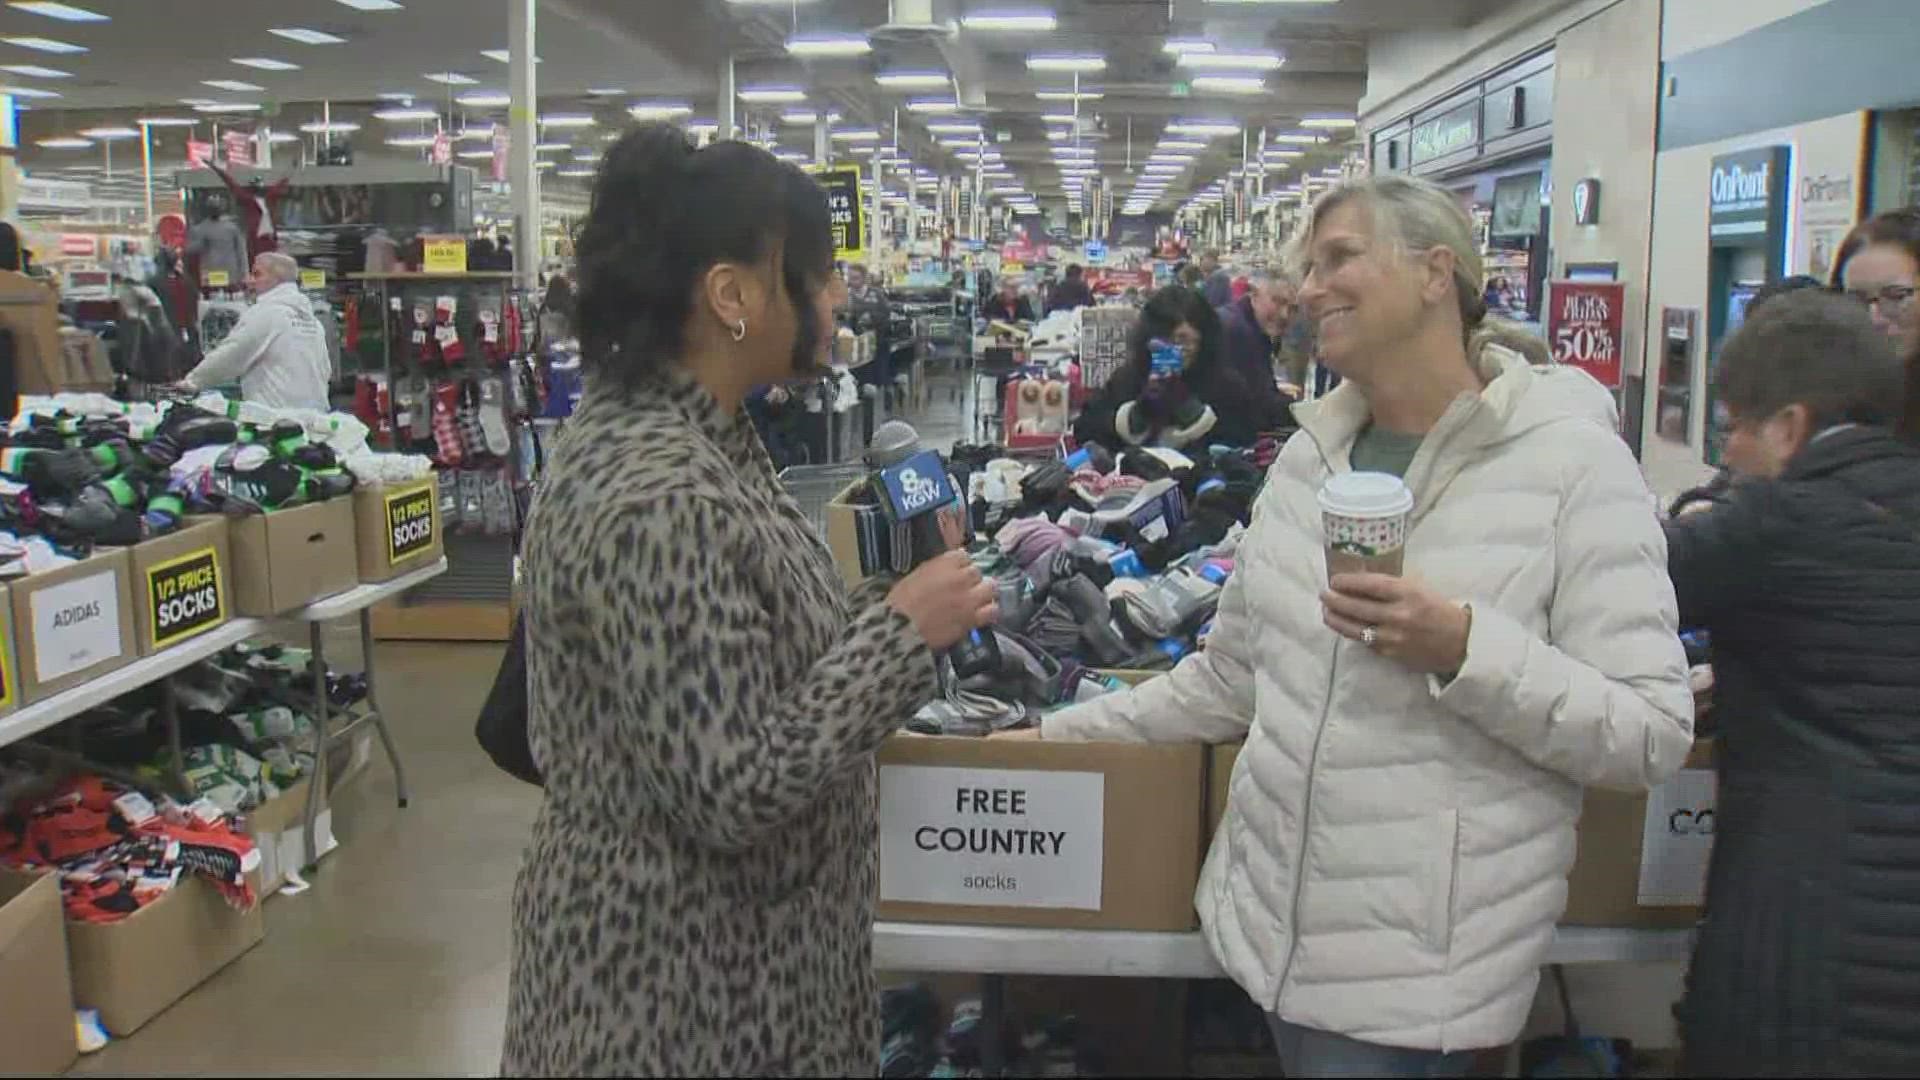 This year marks Fred Myers' 100th anniversary with the return of their annual socks sale the day after Thanksgiving. Daisy Caballero spoke to Black Friday shoppers.